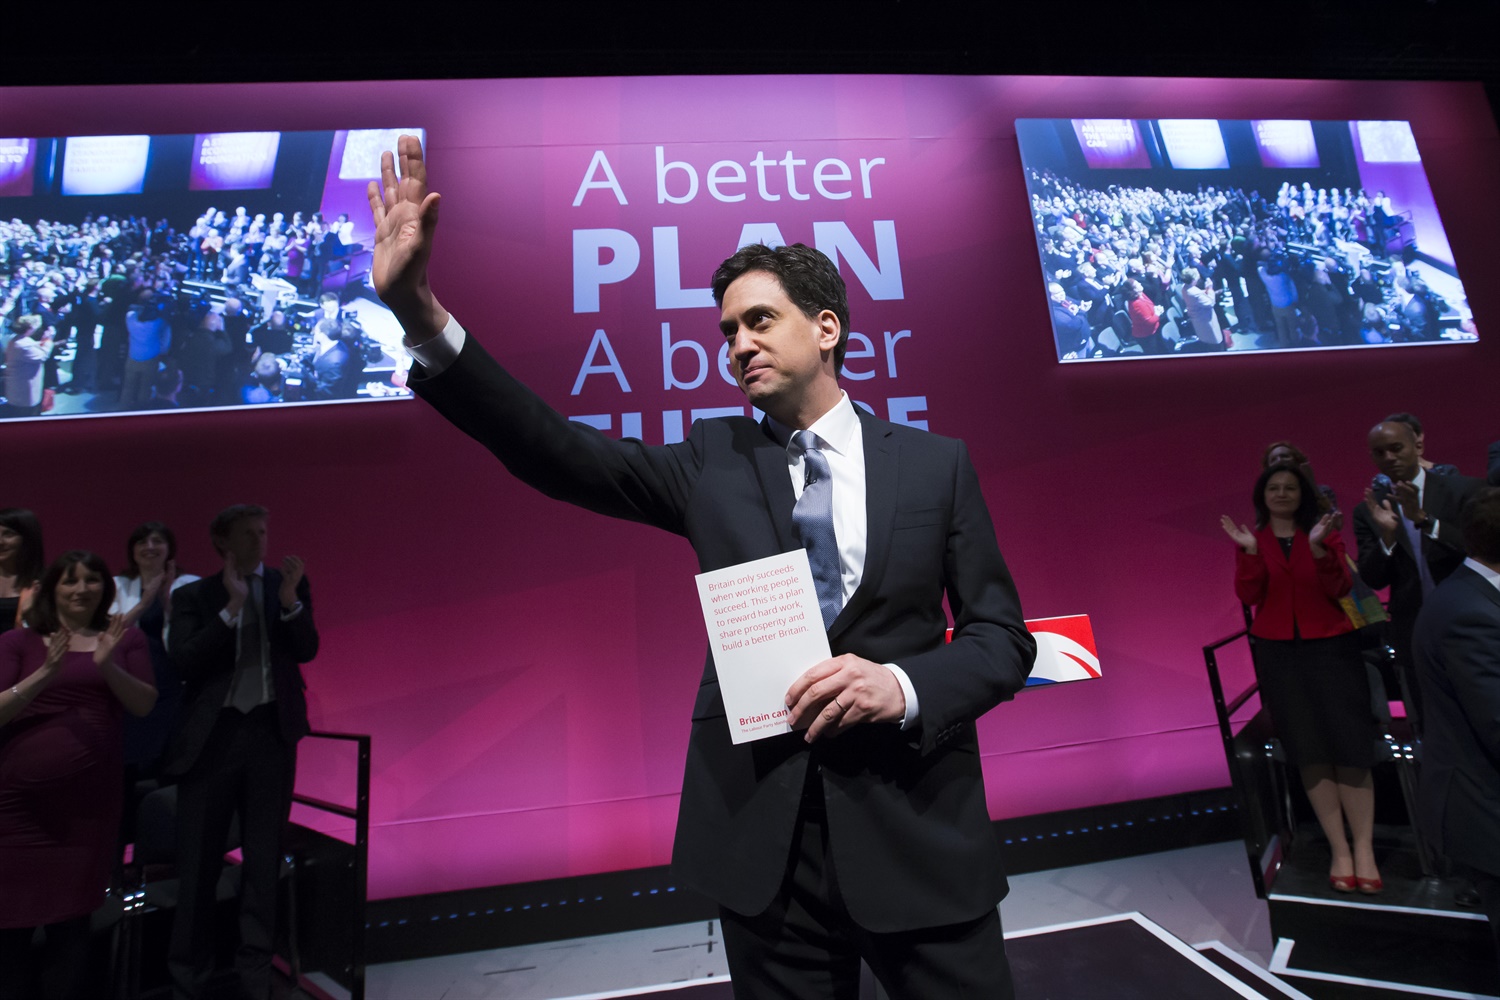 Labour pledges franchising review in manifesto